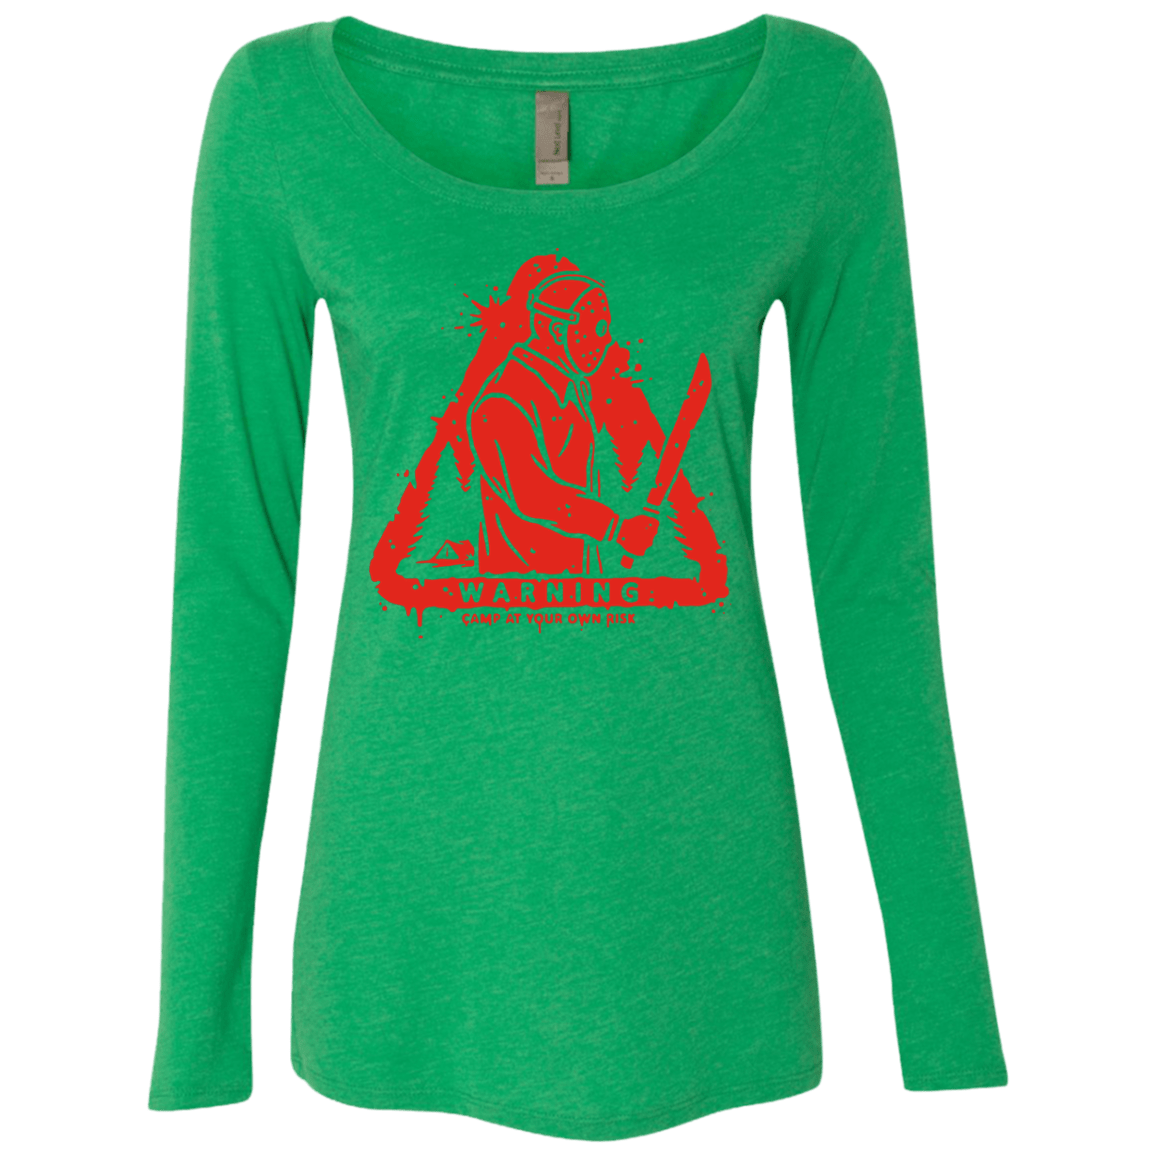 T-Shirts Envy / S Camp at Your Own Risk Women's Triblend Long Sleeve Shirt